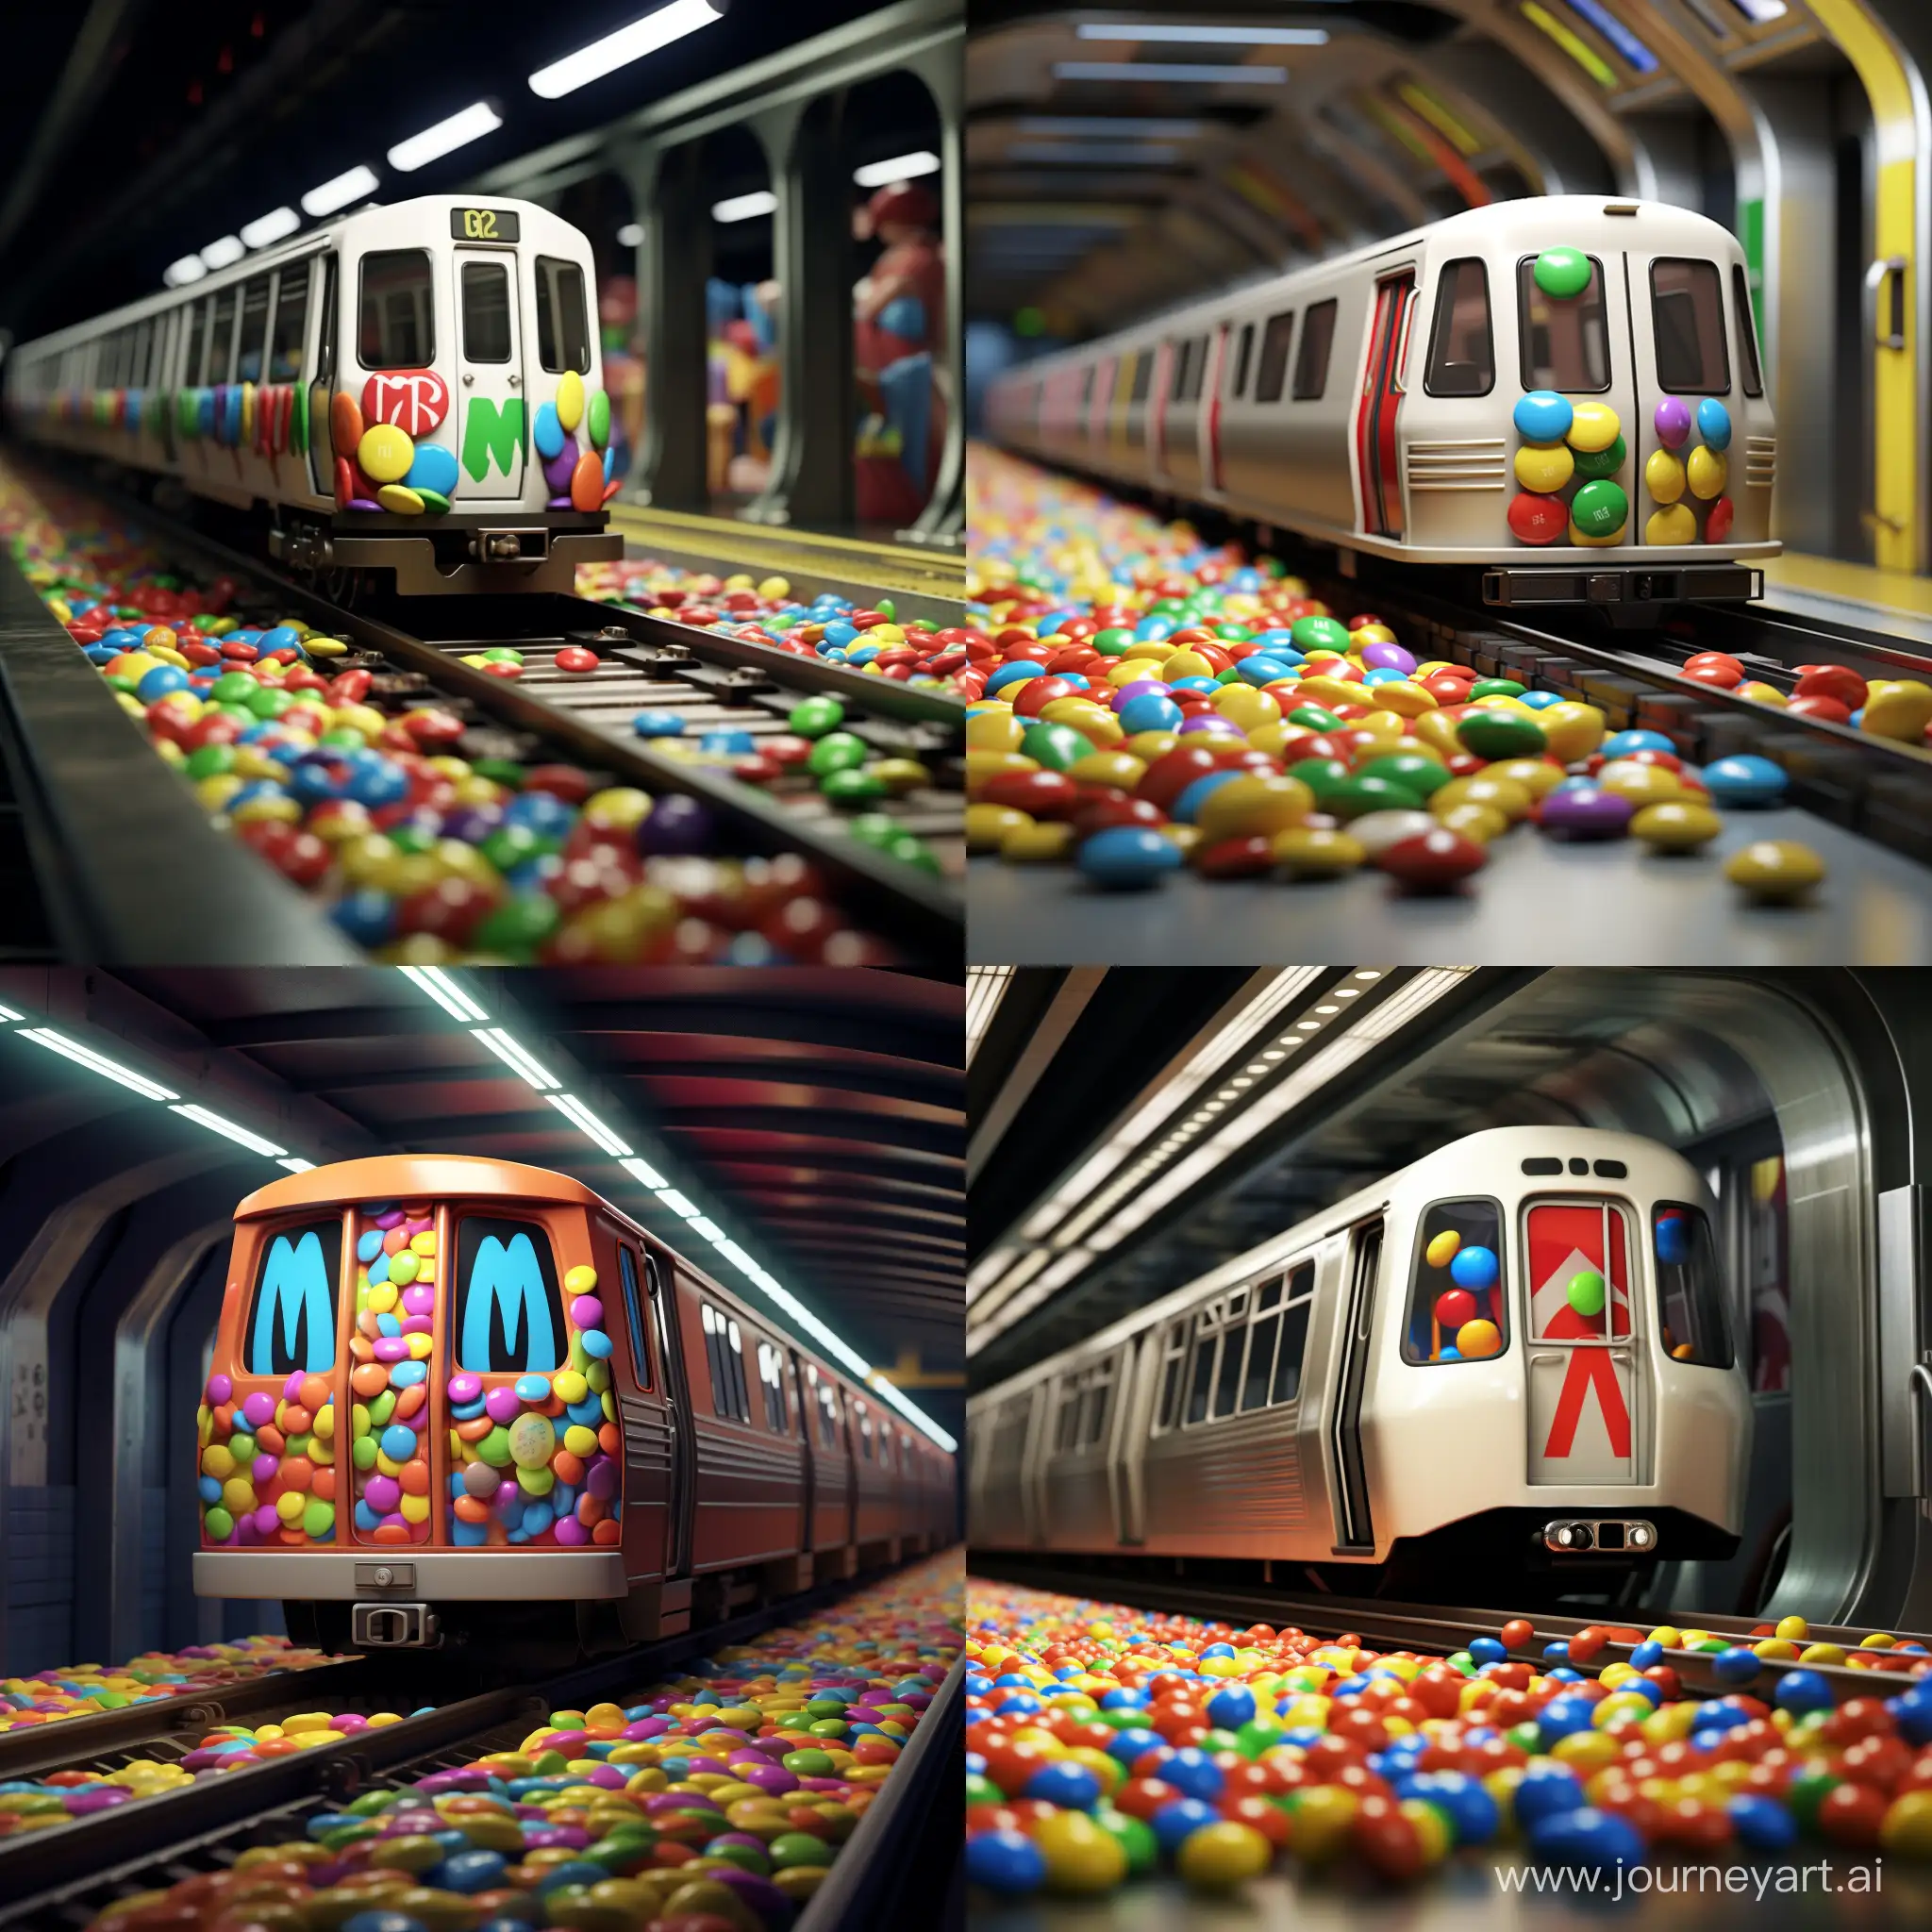 Colorful-MMs-Candy-Riding-the-Subway